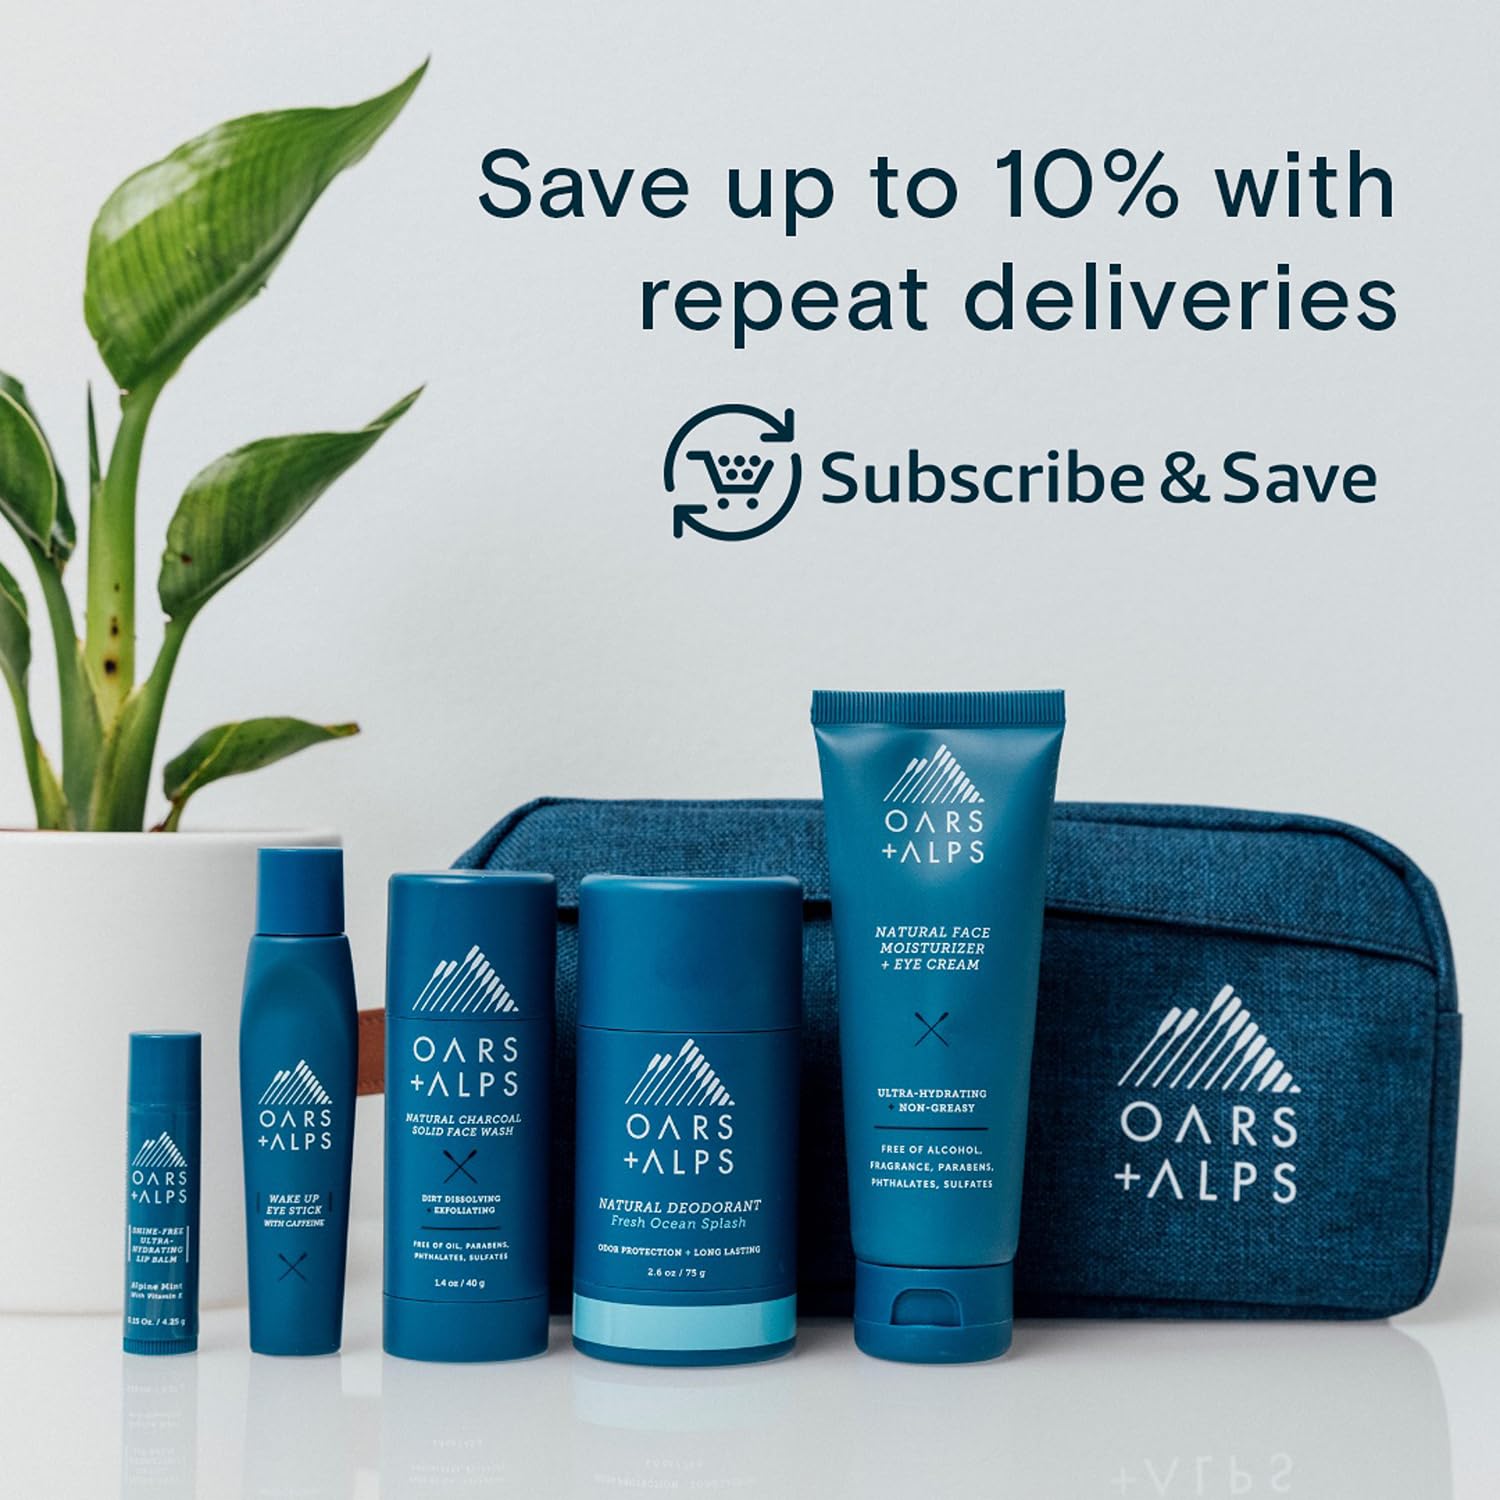 Oars + Alps Hair and Body Travel Kit for Men, Includes Sulfate Free Shampoo, Conditioner, Body Wash, Deodorant, and Reusable Pouch, TSA Friendly, Fresh Ocean Splash Scent : Beauty & Personal Care